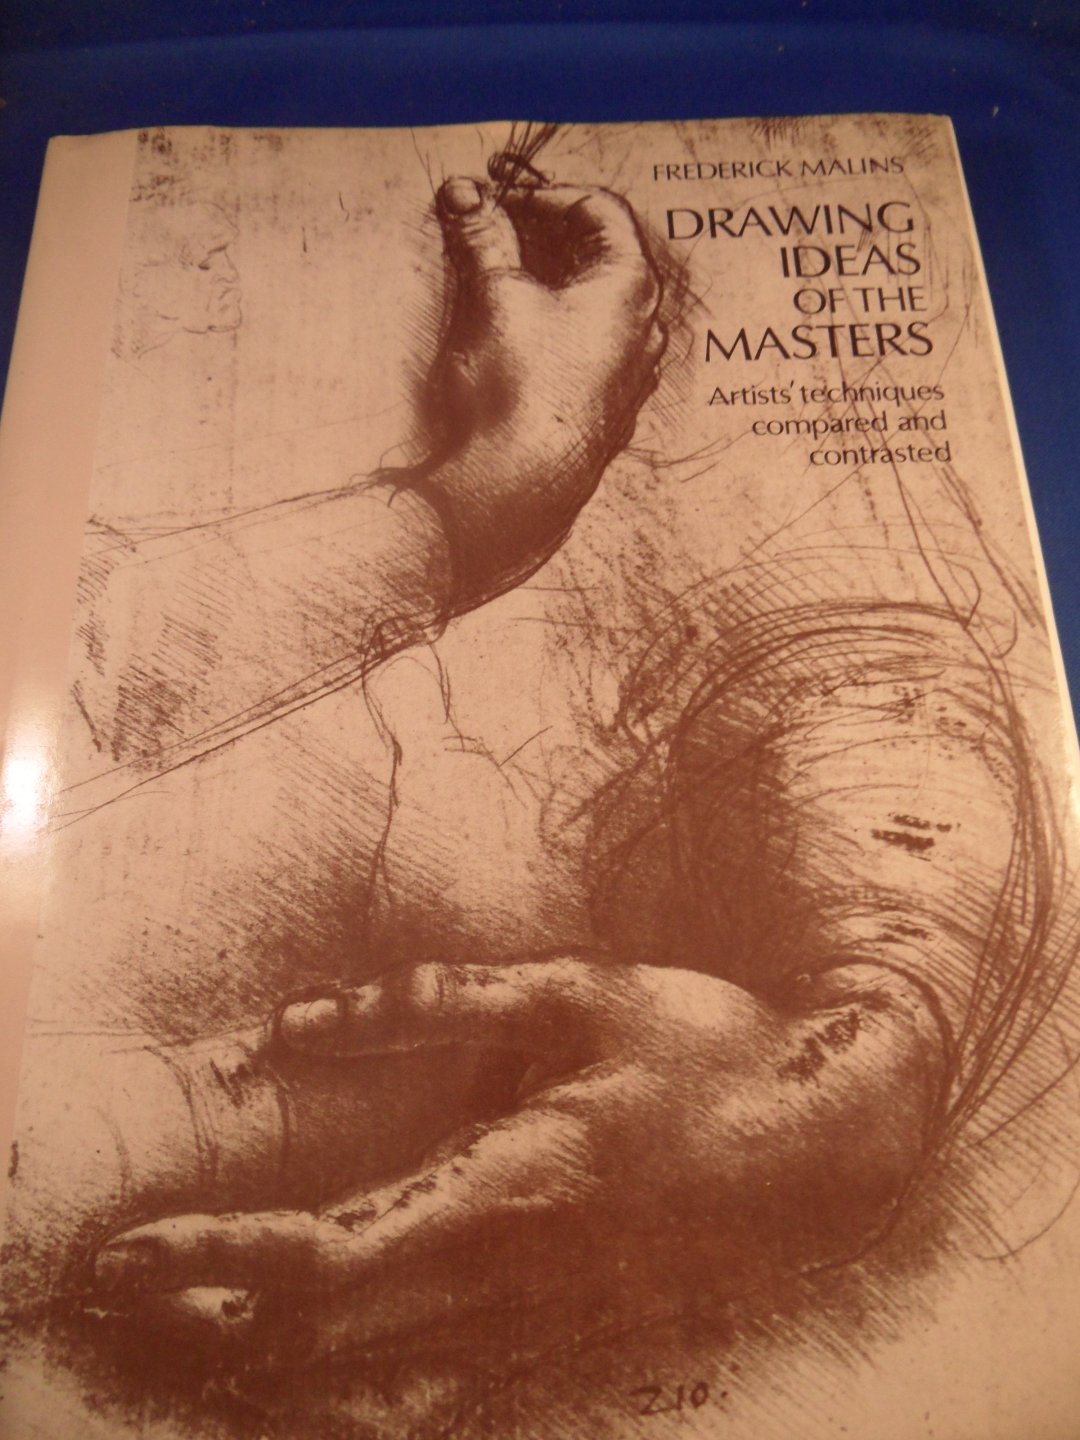 Malins, Frederick - Drawing ideas of the masters.  Artistis' techniques compared and contrasted